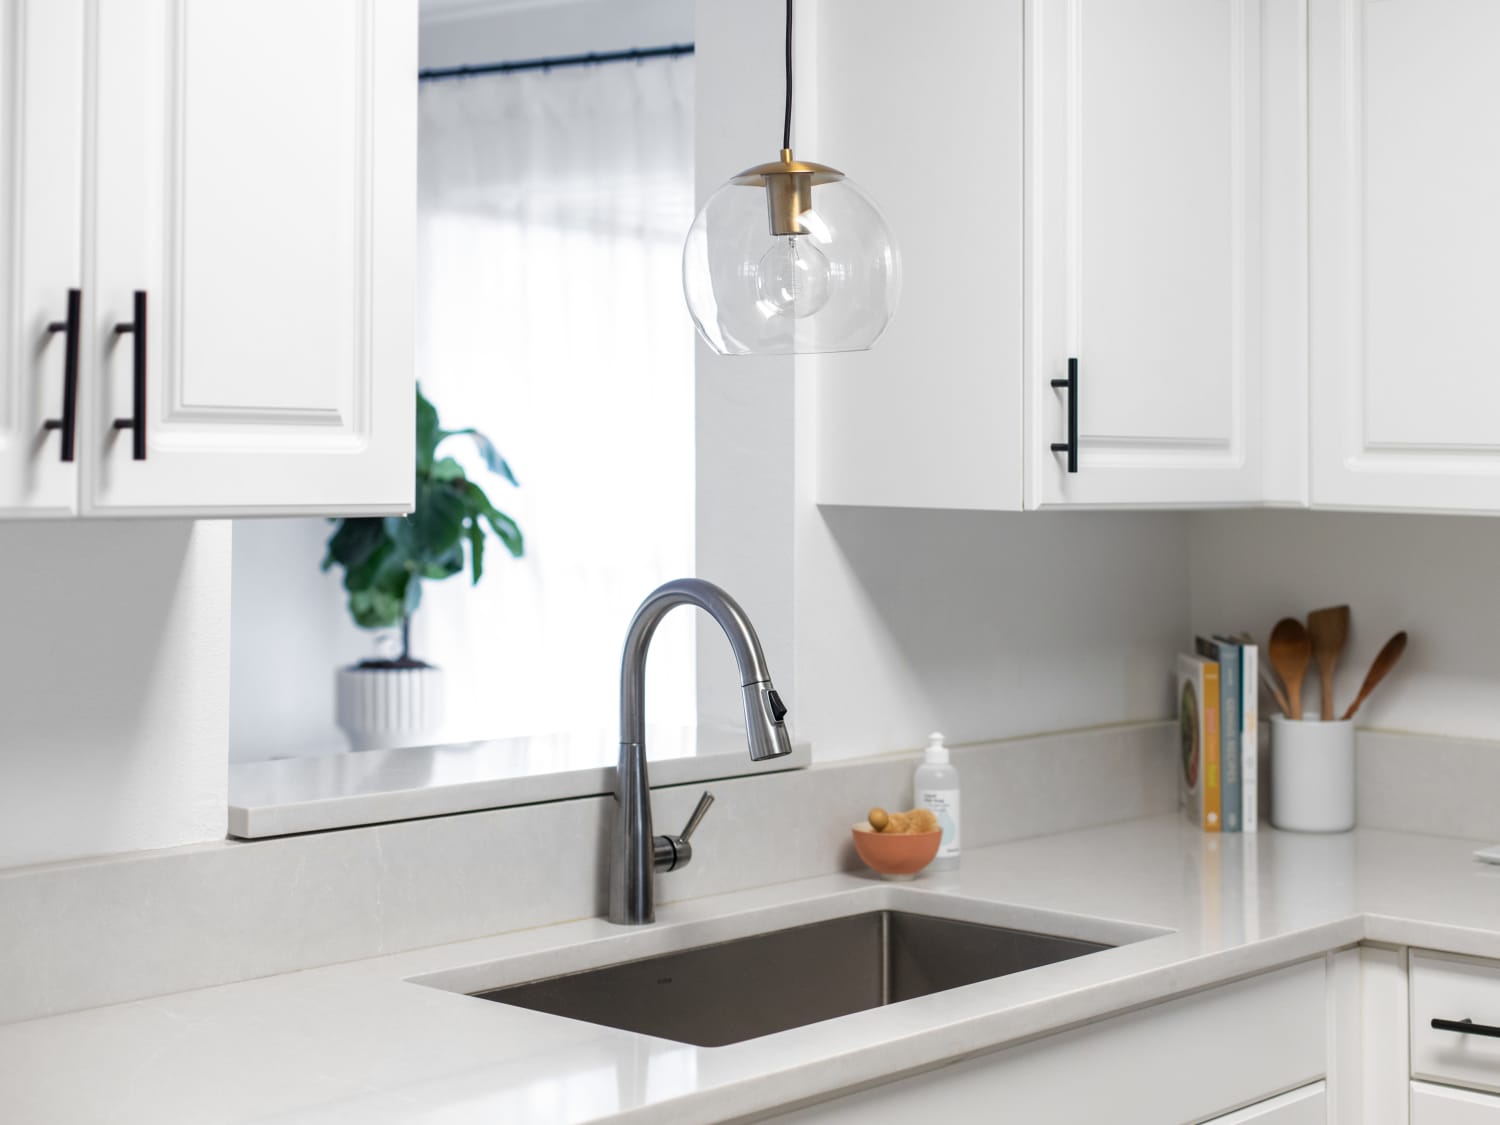 simple pendant light for over kitchen sink